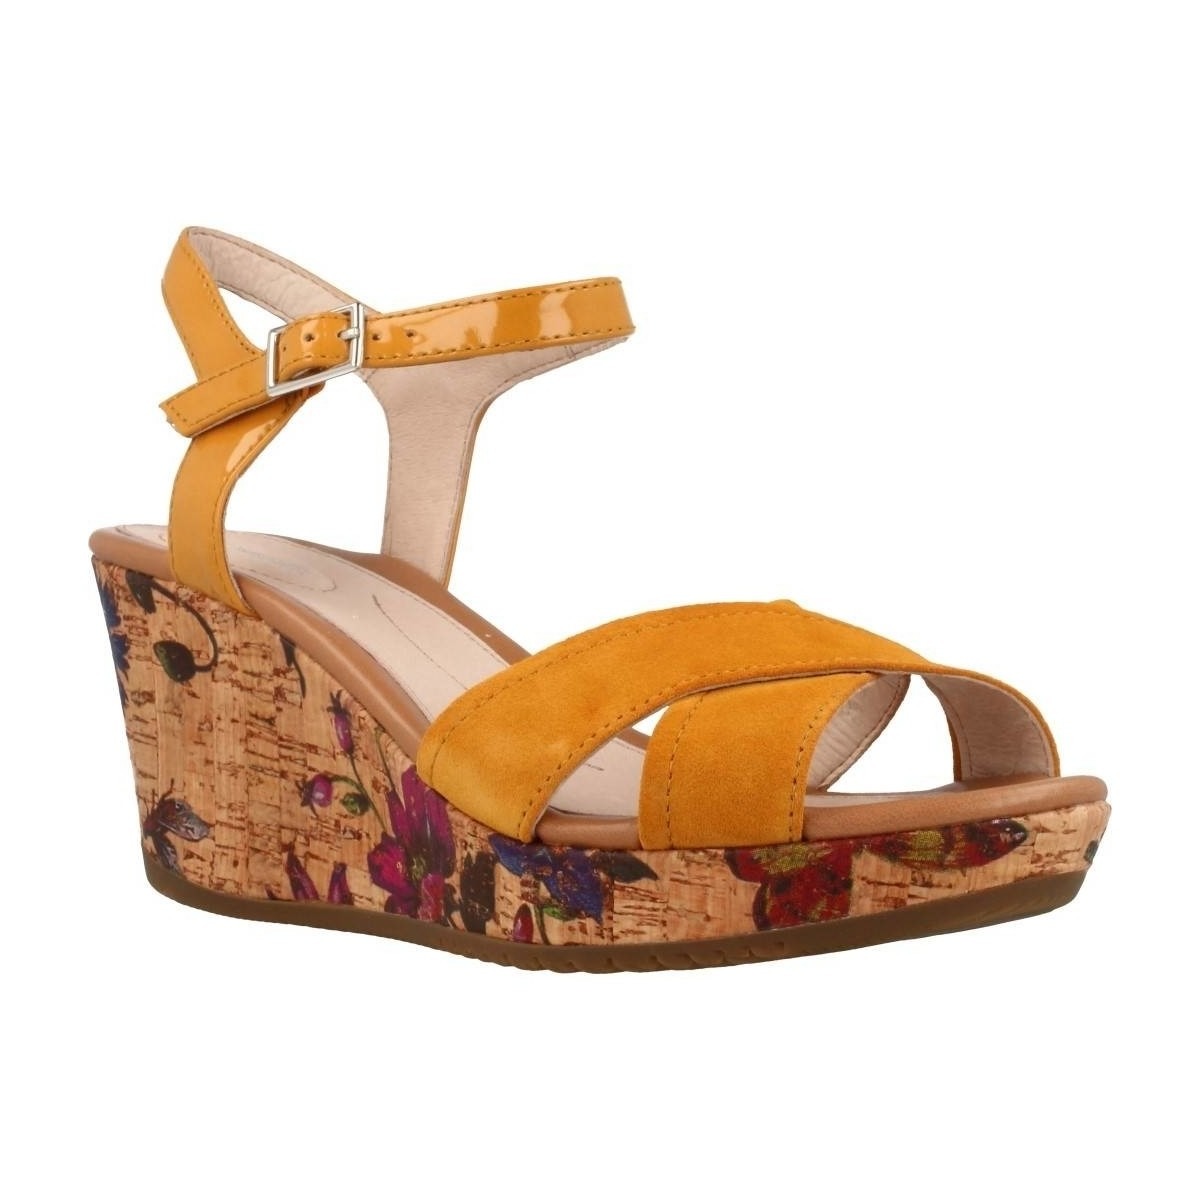 Stonefly Sandals Brown for Woman at Spartoo GOOFASH